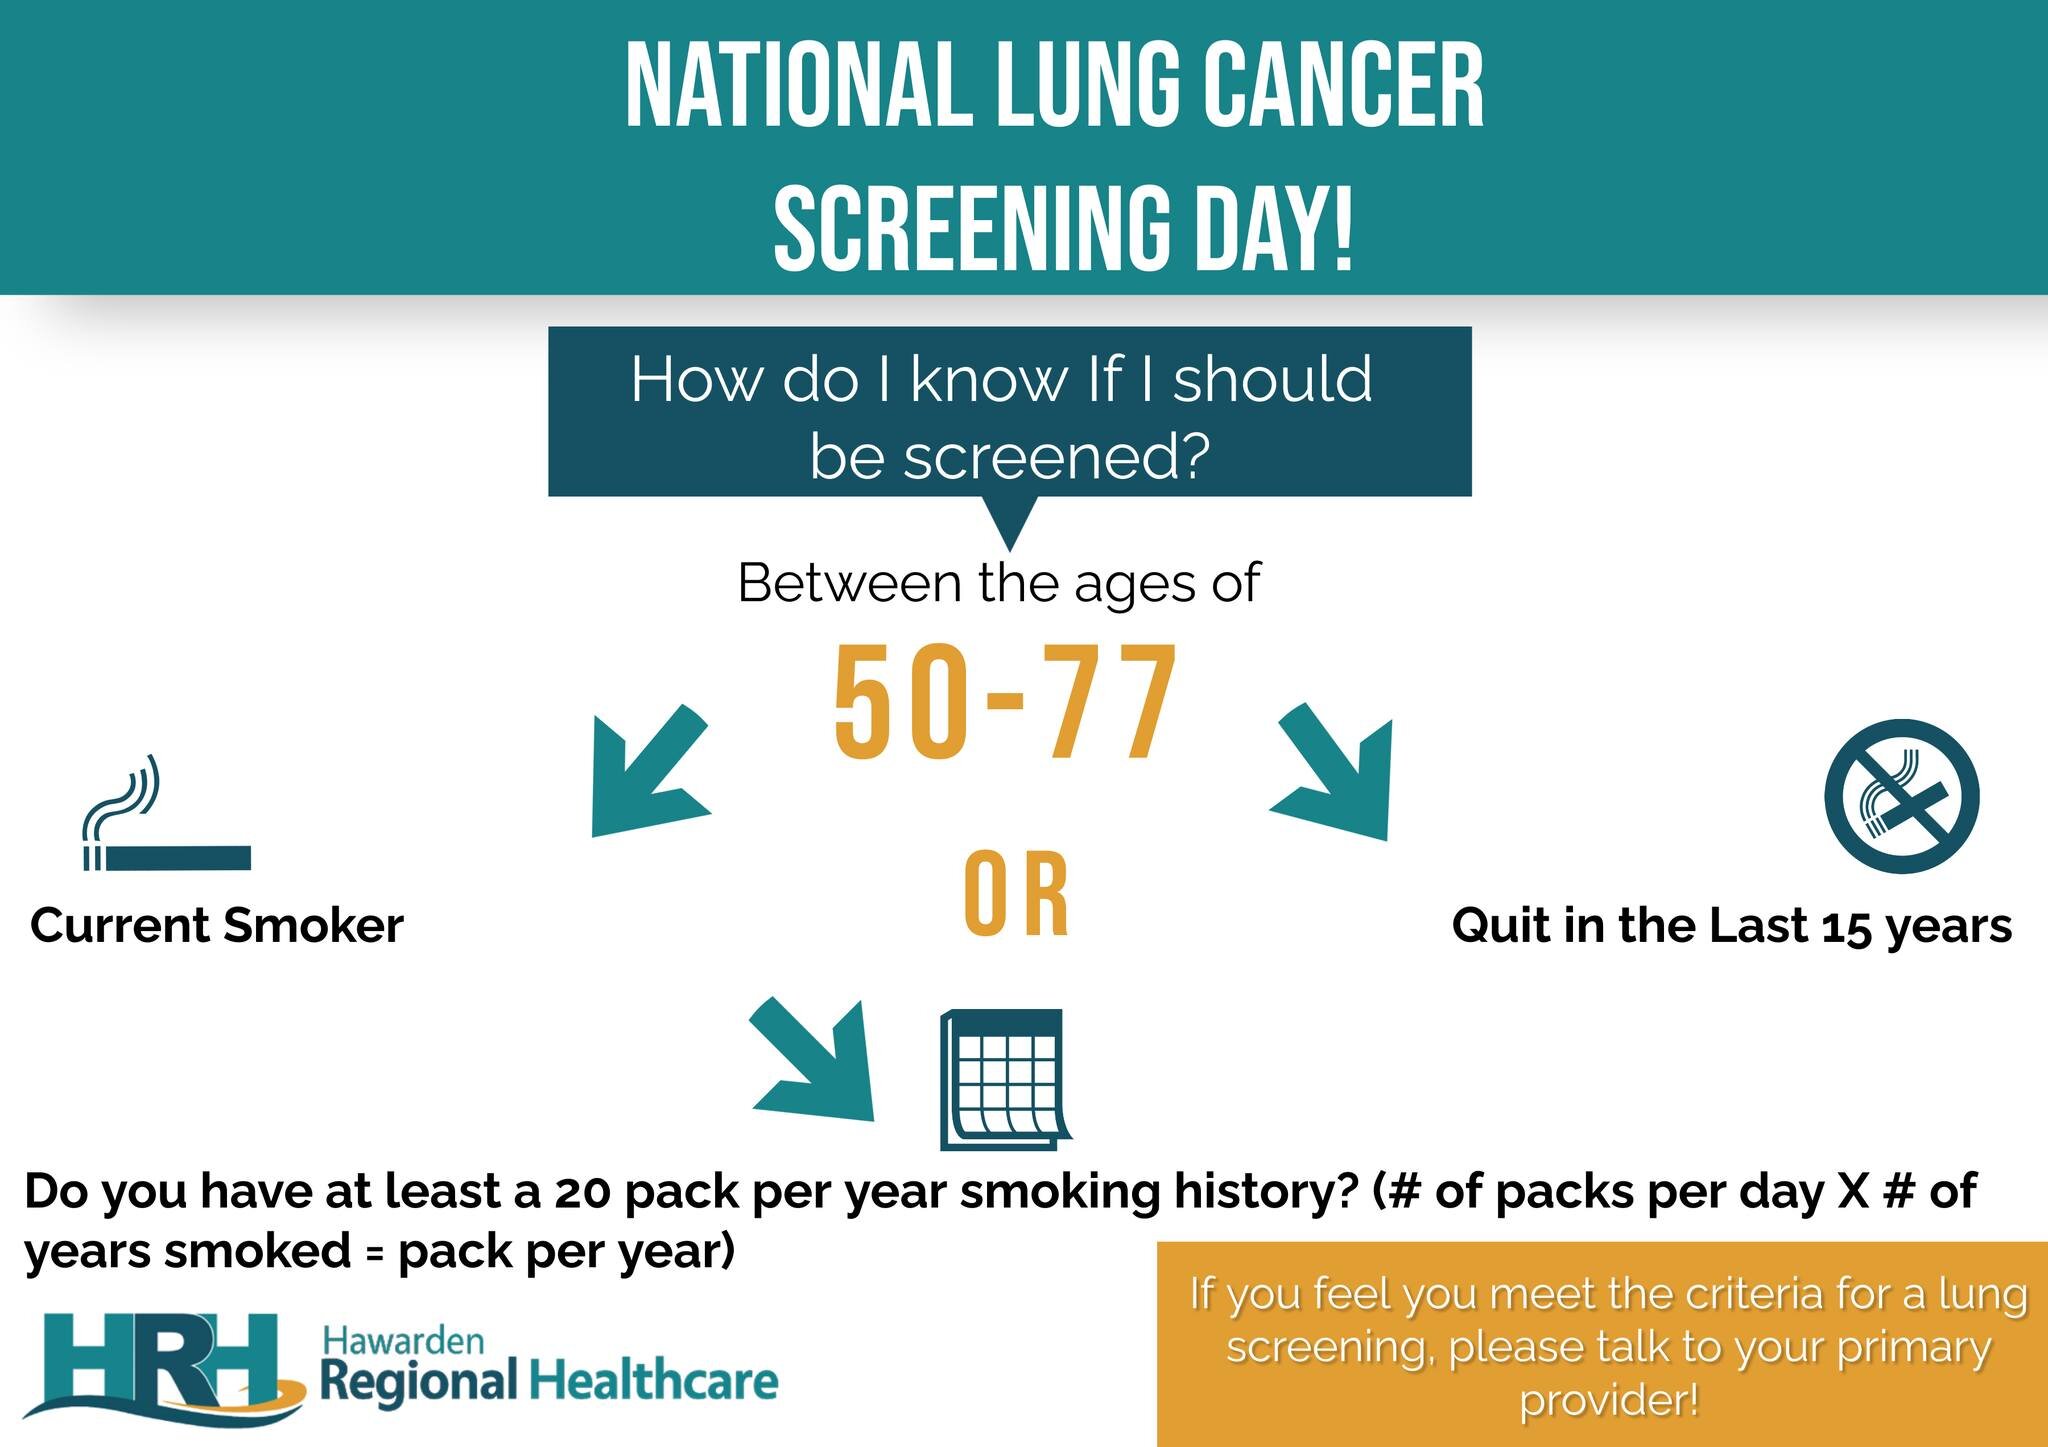 Just a reminder National Lung Cancer Screening Day was November 12th. 🫁 Please contact your primary provider to see if you should be screened today!